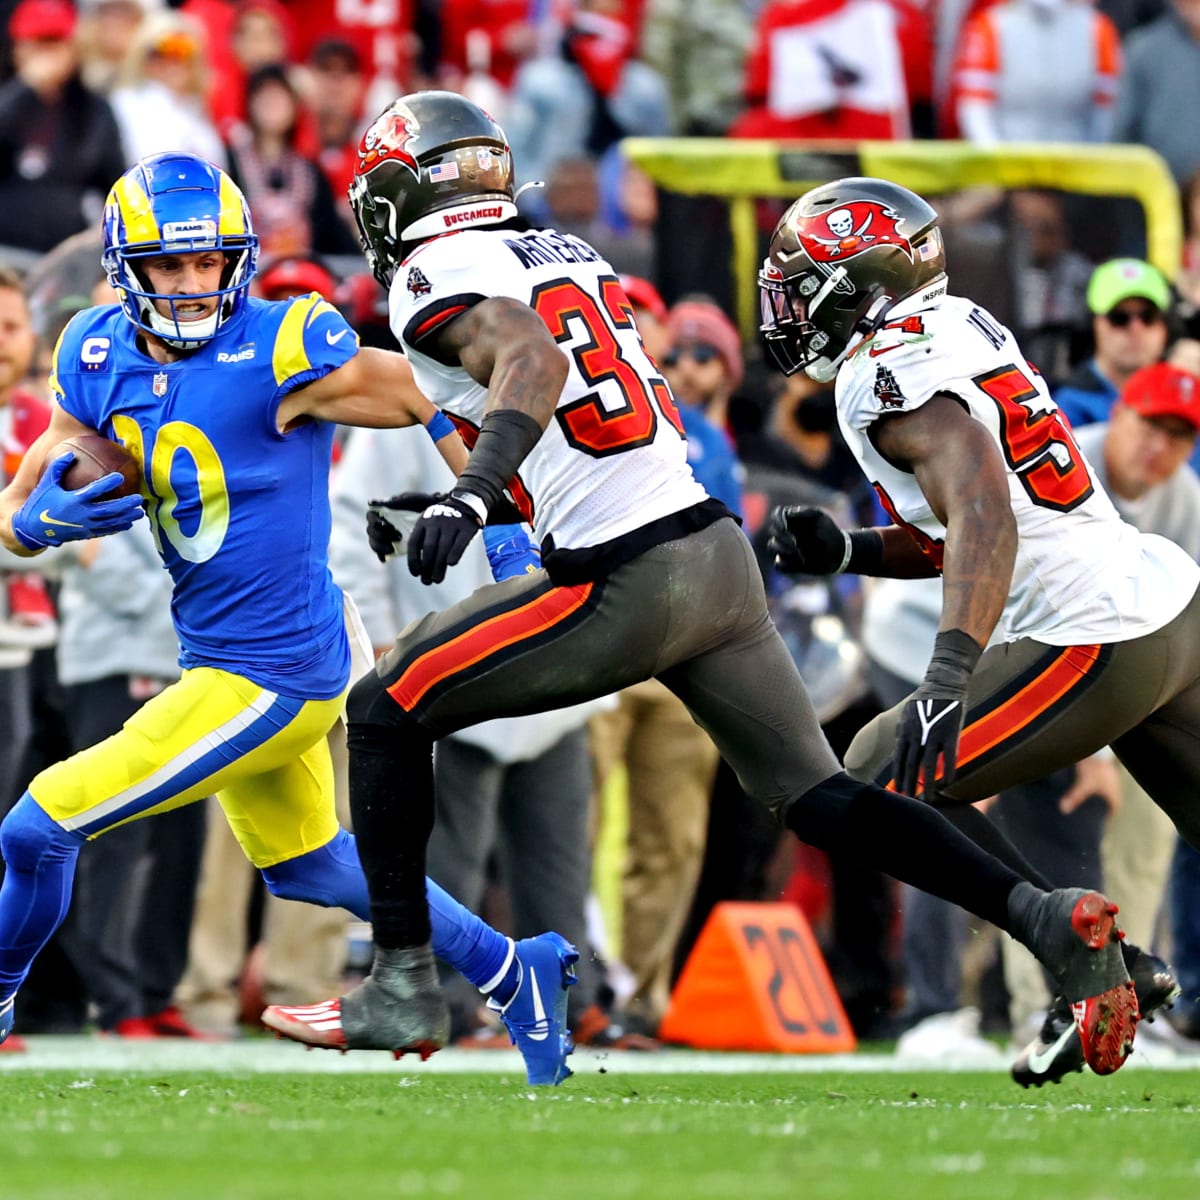 Matthew Stafford's the showstopper as Rams handle Bucs